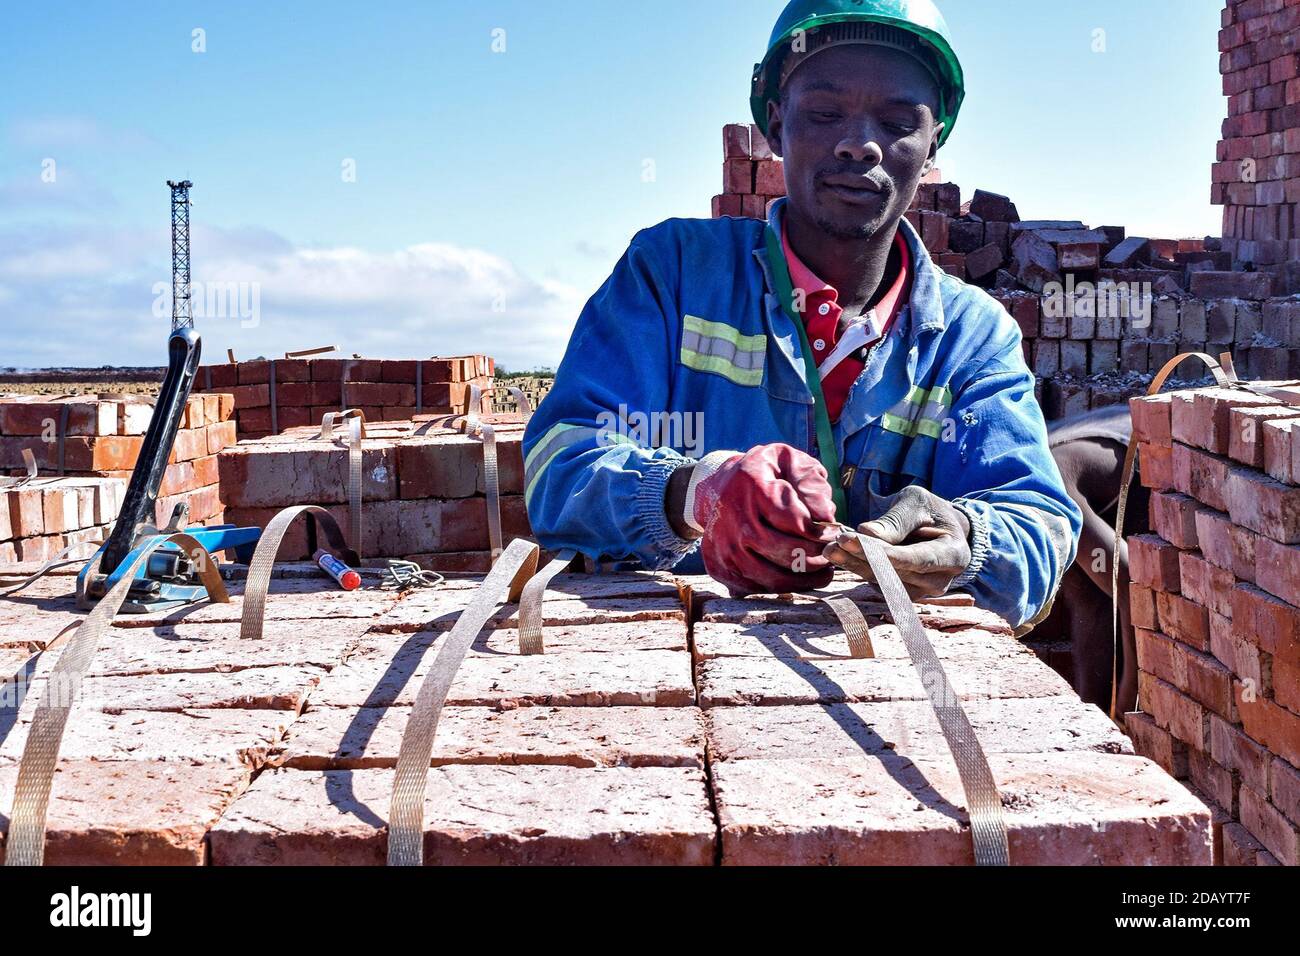 Admire Chipango straps bundles of bricks together, using plastic strapping from recycled brown bottles. Stock Photo